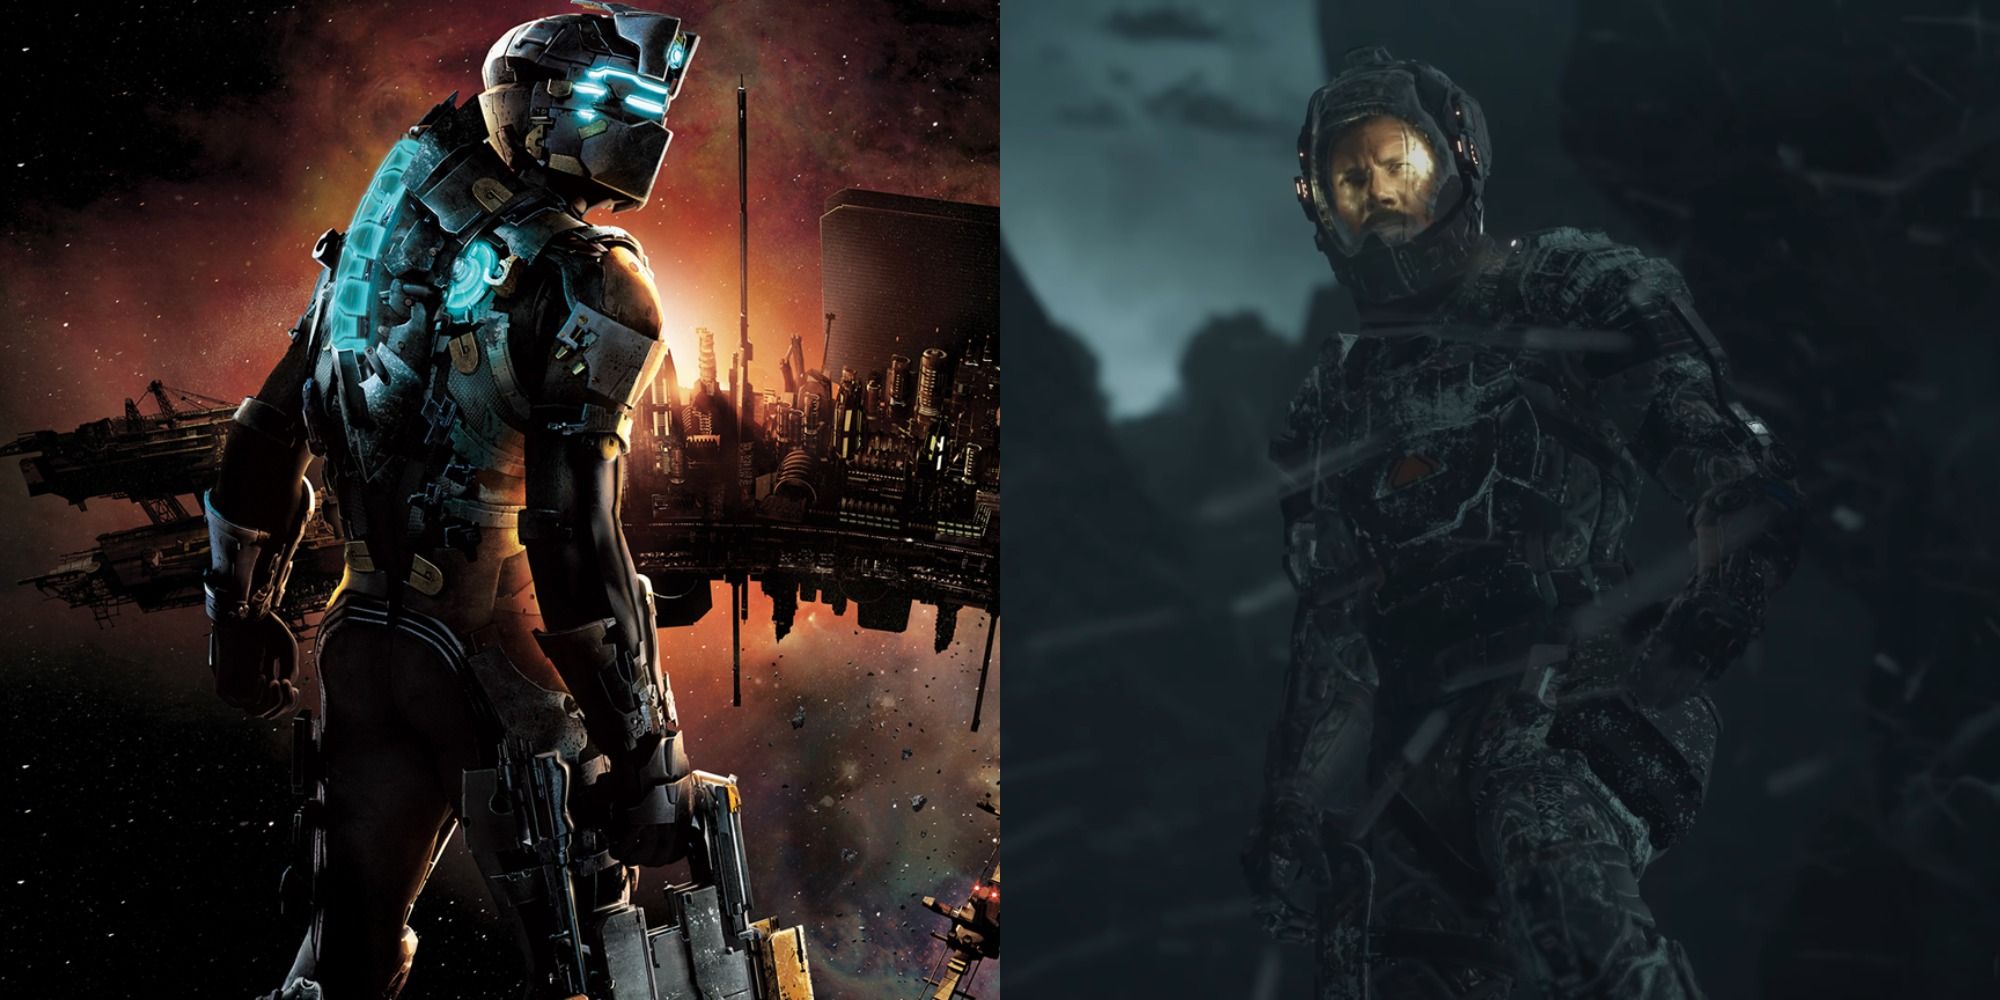 Split image of Isaac Clarke in cover art for Dead Space 2 and Jacob Lee in the snowy wastes of Callisto in The Callisto Protocol